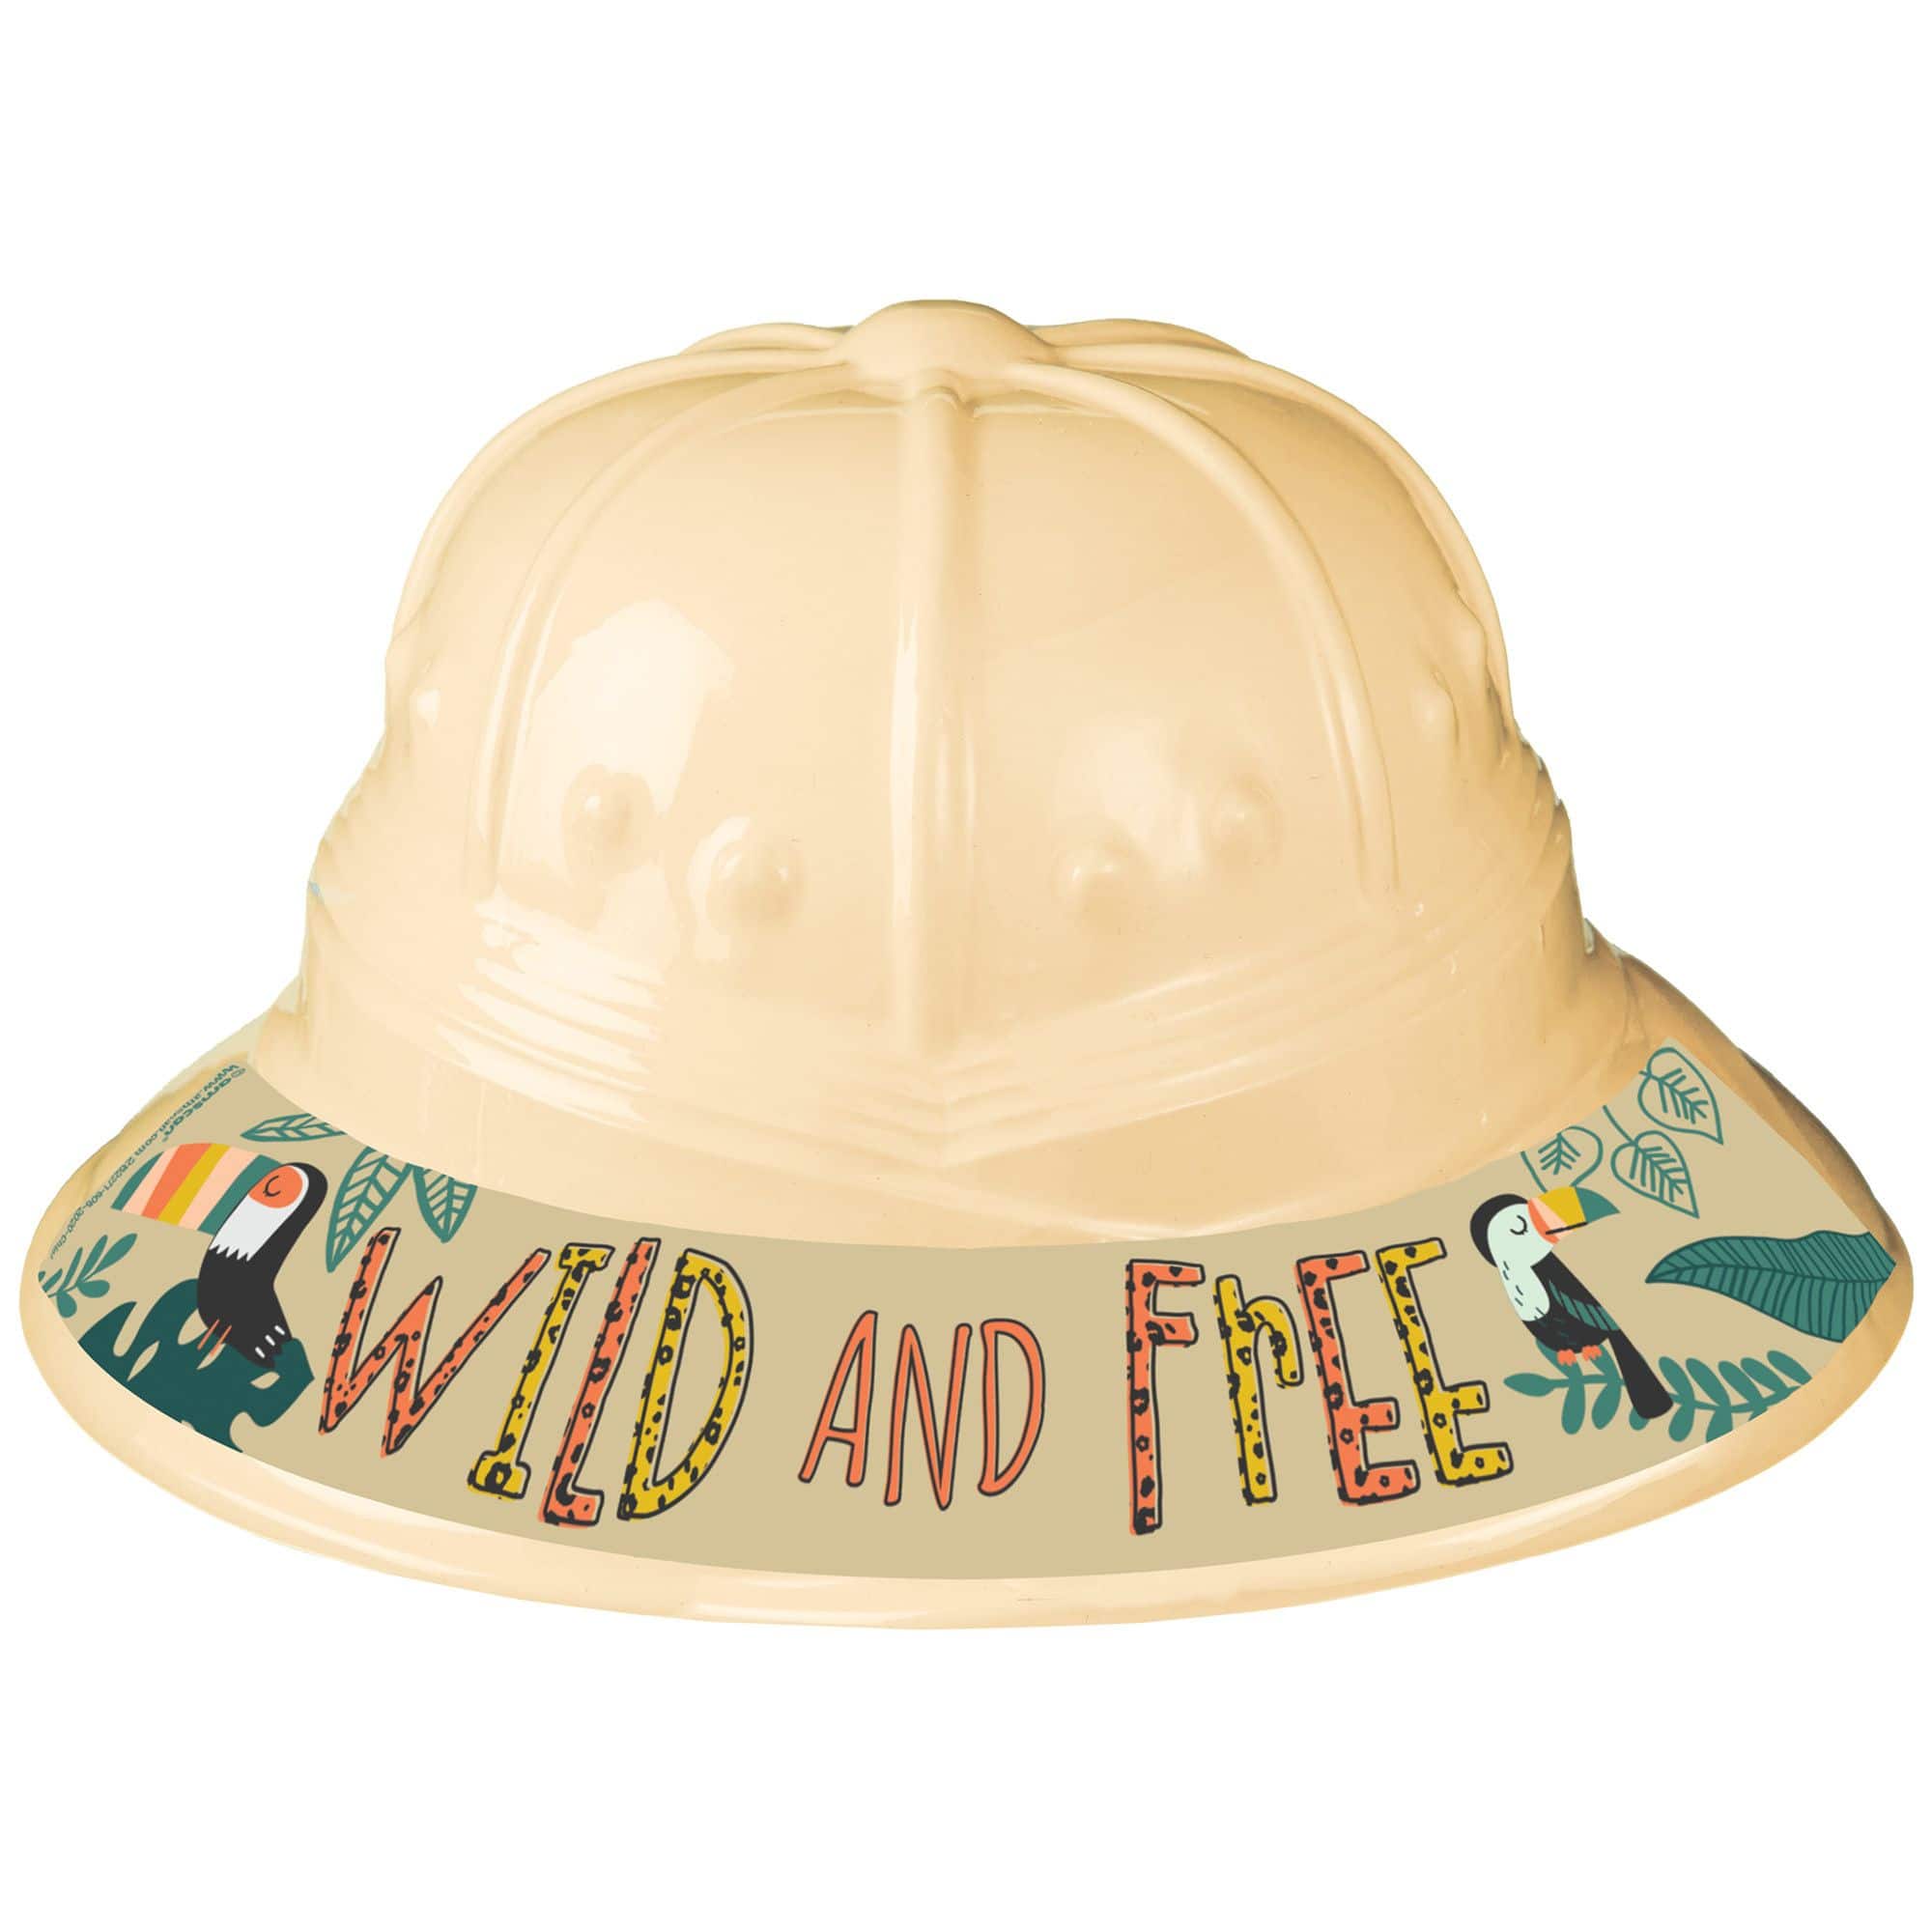 https://media-www.canadiantire.ca/product/seasonal-gardening/party-city-everyday/party-city-party-supplies-decor/8534253/vac-form-safari-hat-44cb9688-ab77-447f-8018-7bb60c6f6d9f-jpgrendition.jpg